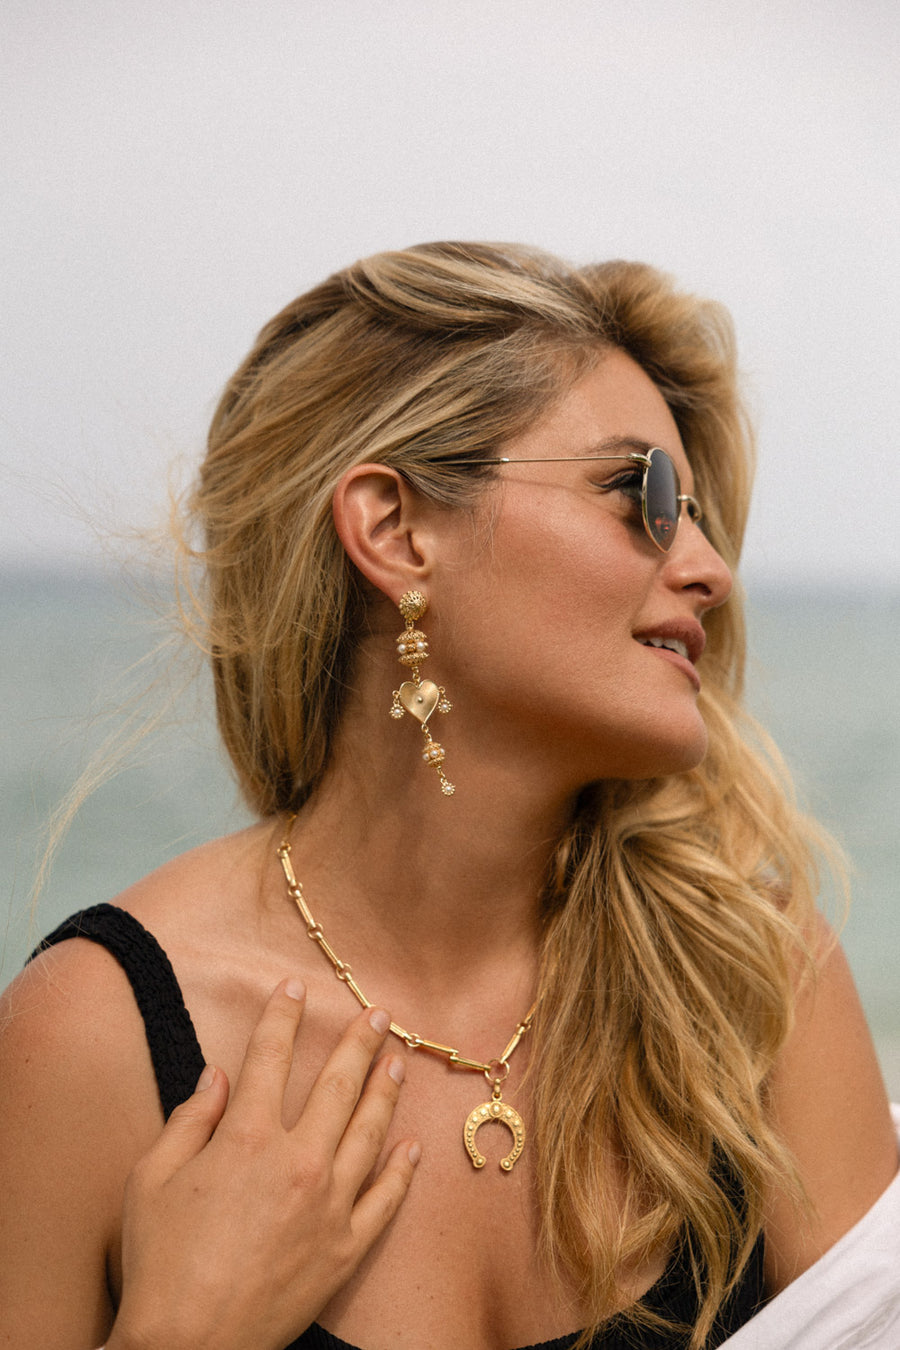 Daphne Oz wearing gold horseshoe charm and necklace outsdie at the beach looking to the side 